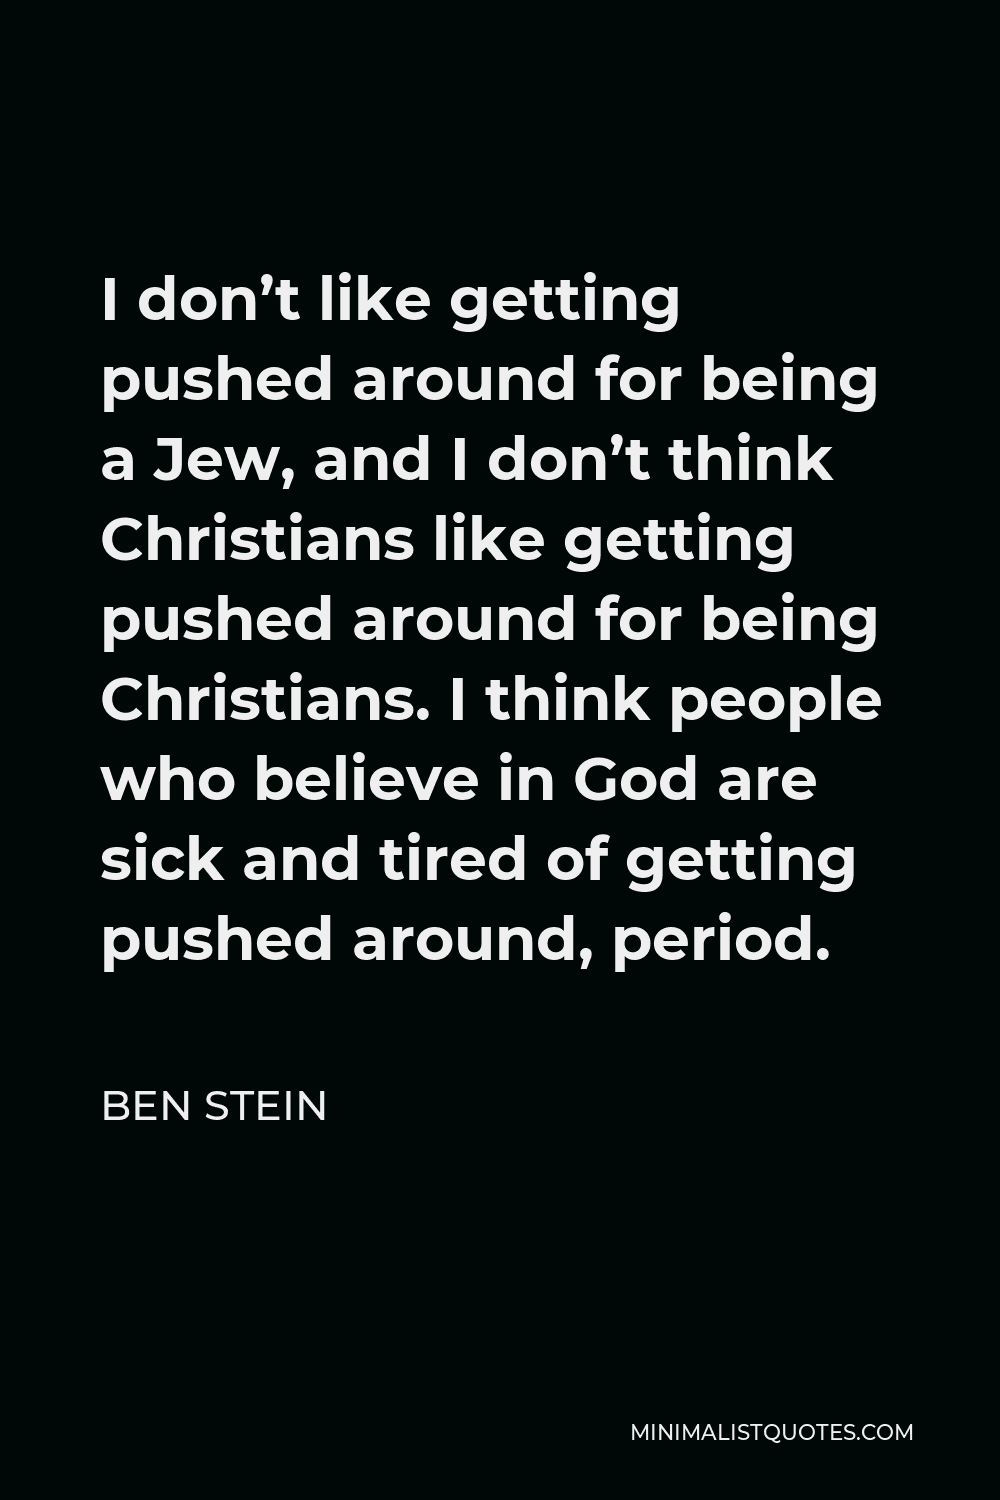 Ben Stein Quote - I don’t like getting pushed around for being a Jew, and I don’t think Christians like getting pushed around for being Christians. I think people who believe in God are sick and tired of getting pushed around, period.